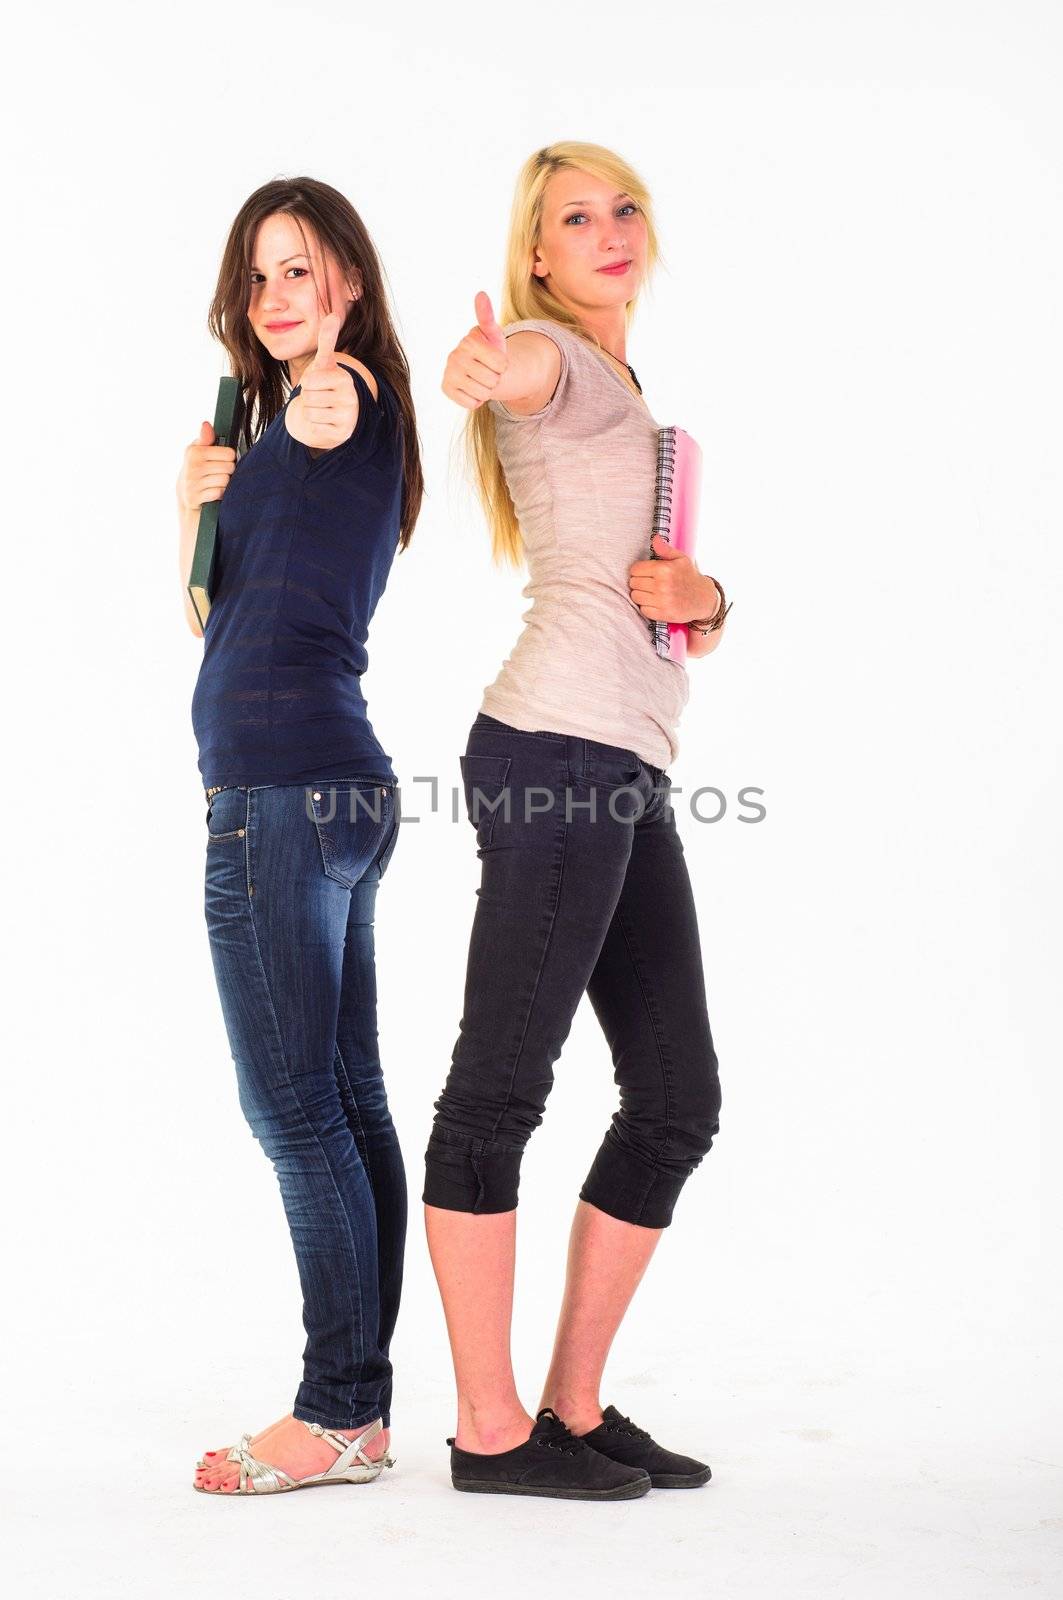 Two beautiful student girls showing thumbs up against white background